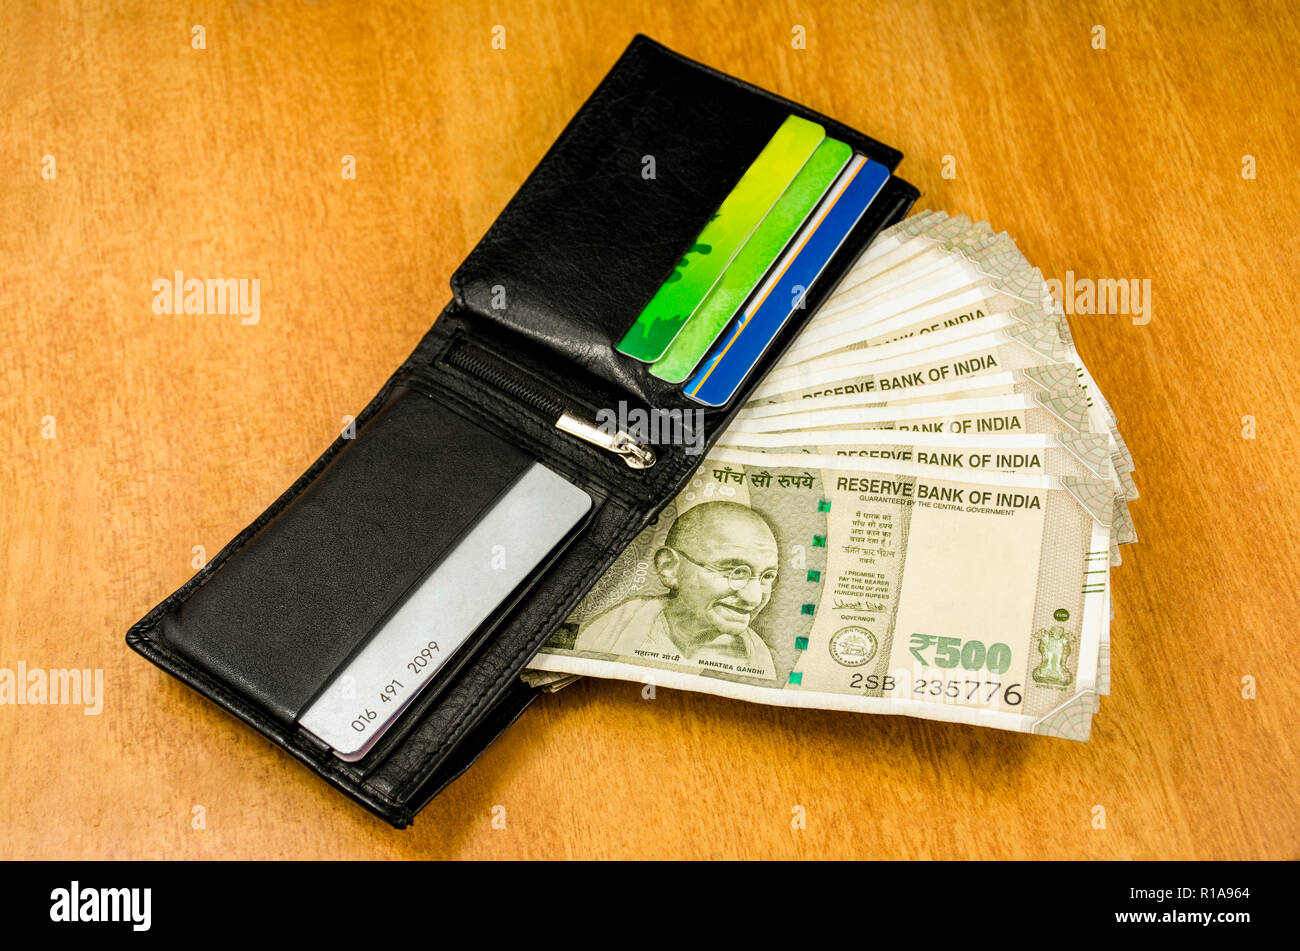 Indian Currency with Purse, Credit Debit Card, Save Money New Currency financial concept background Stock Photo